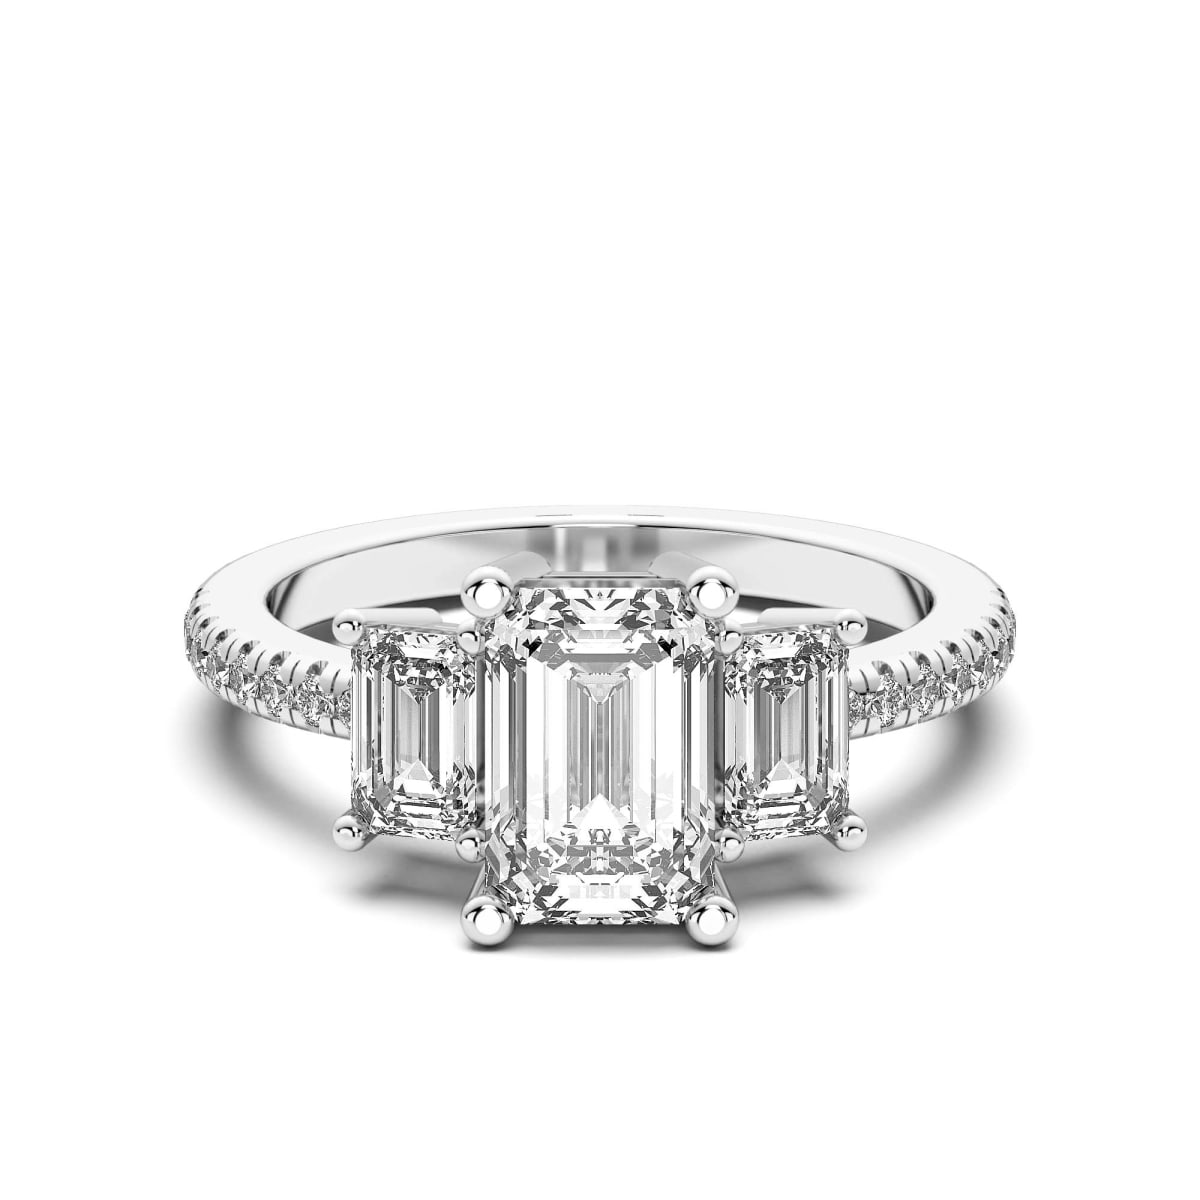 Re-Imagining Your Jewelry | Diamond anniversary rings, Stone ring design,  Fashion rings